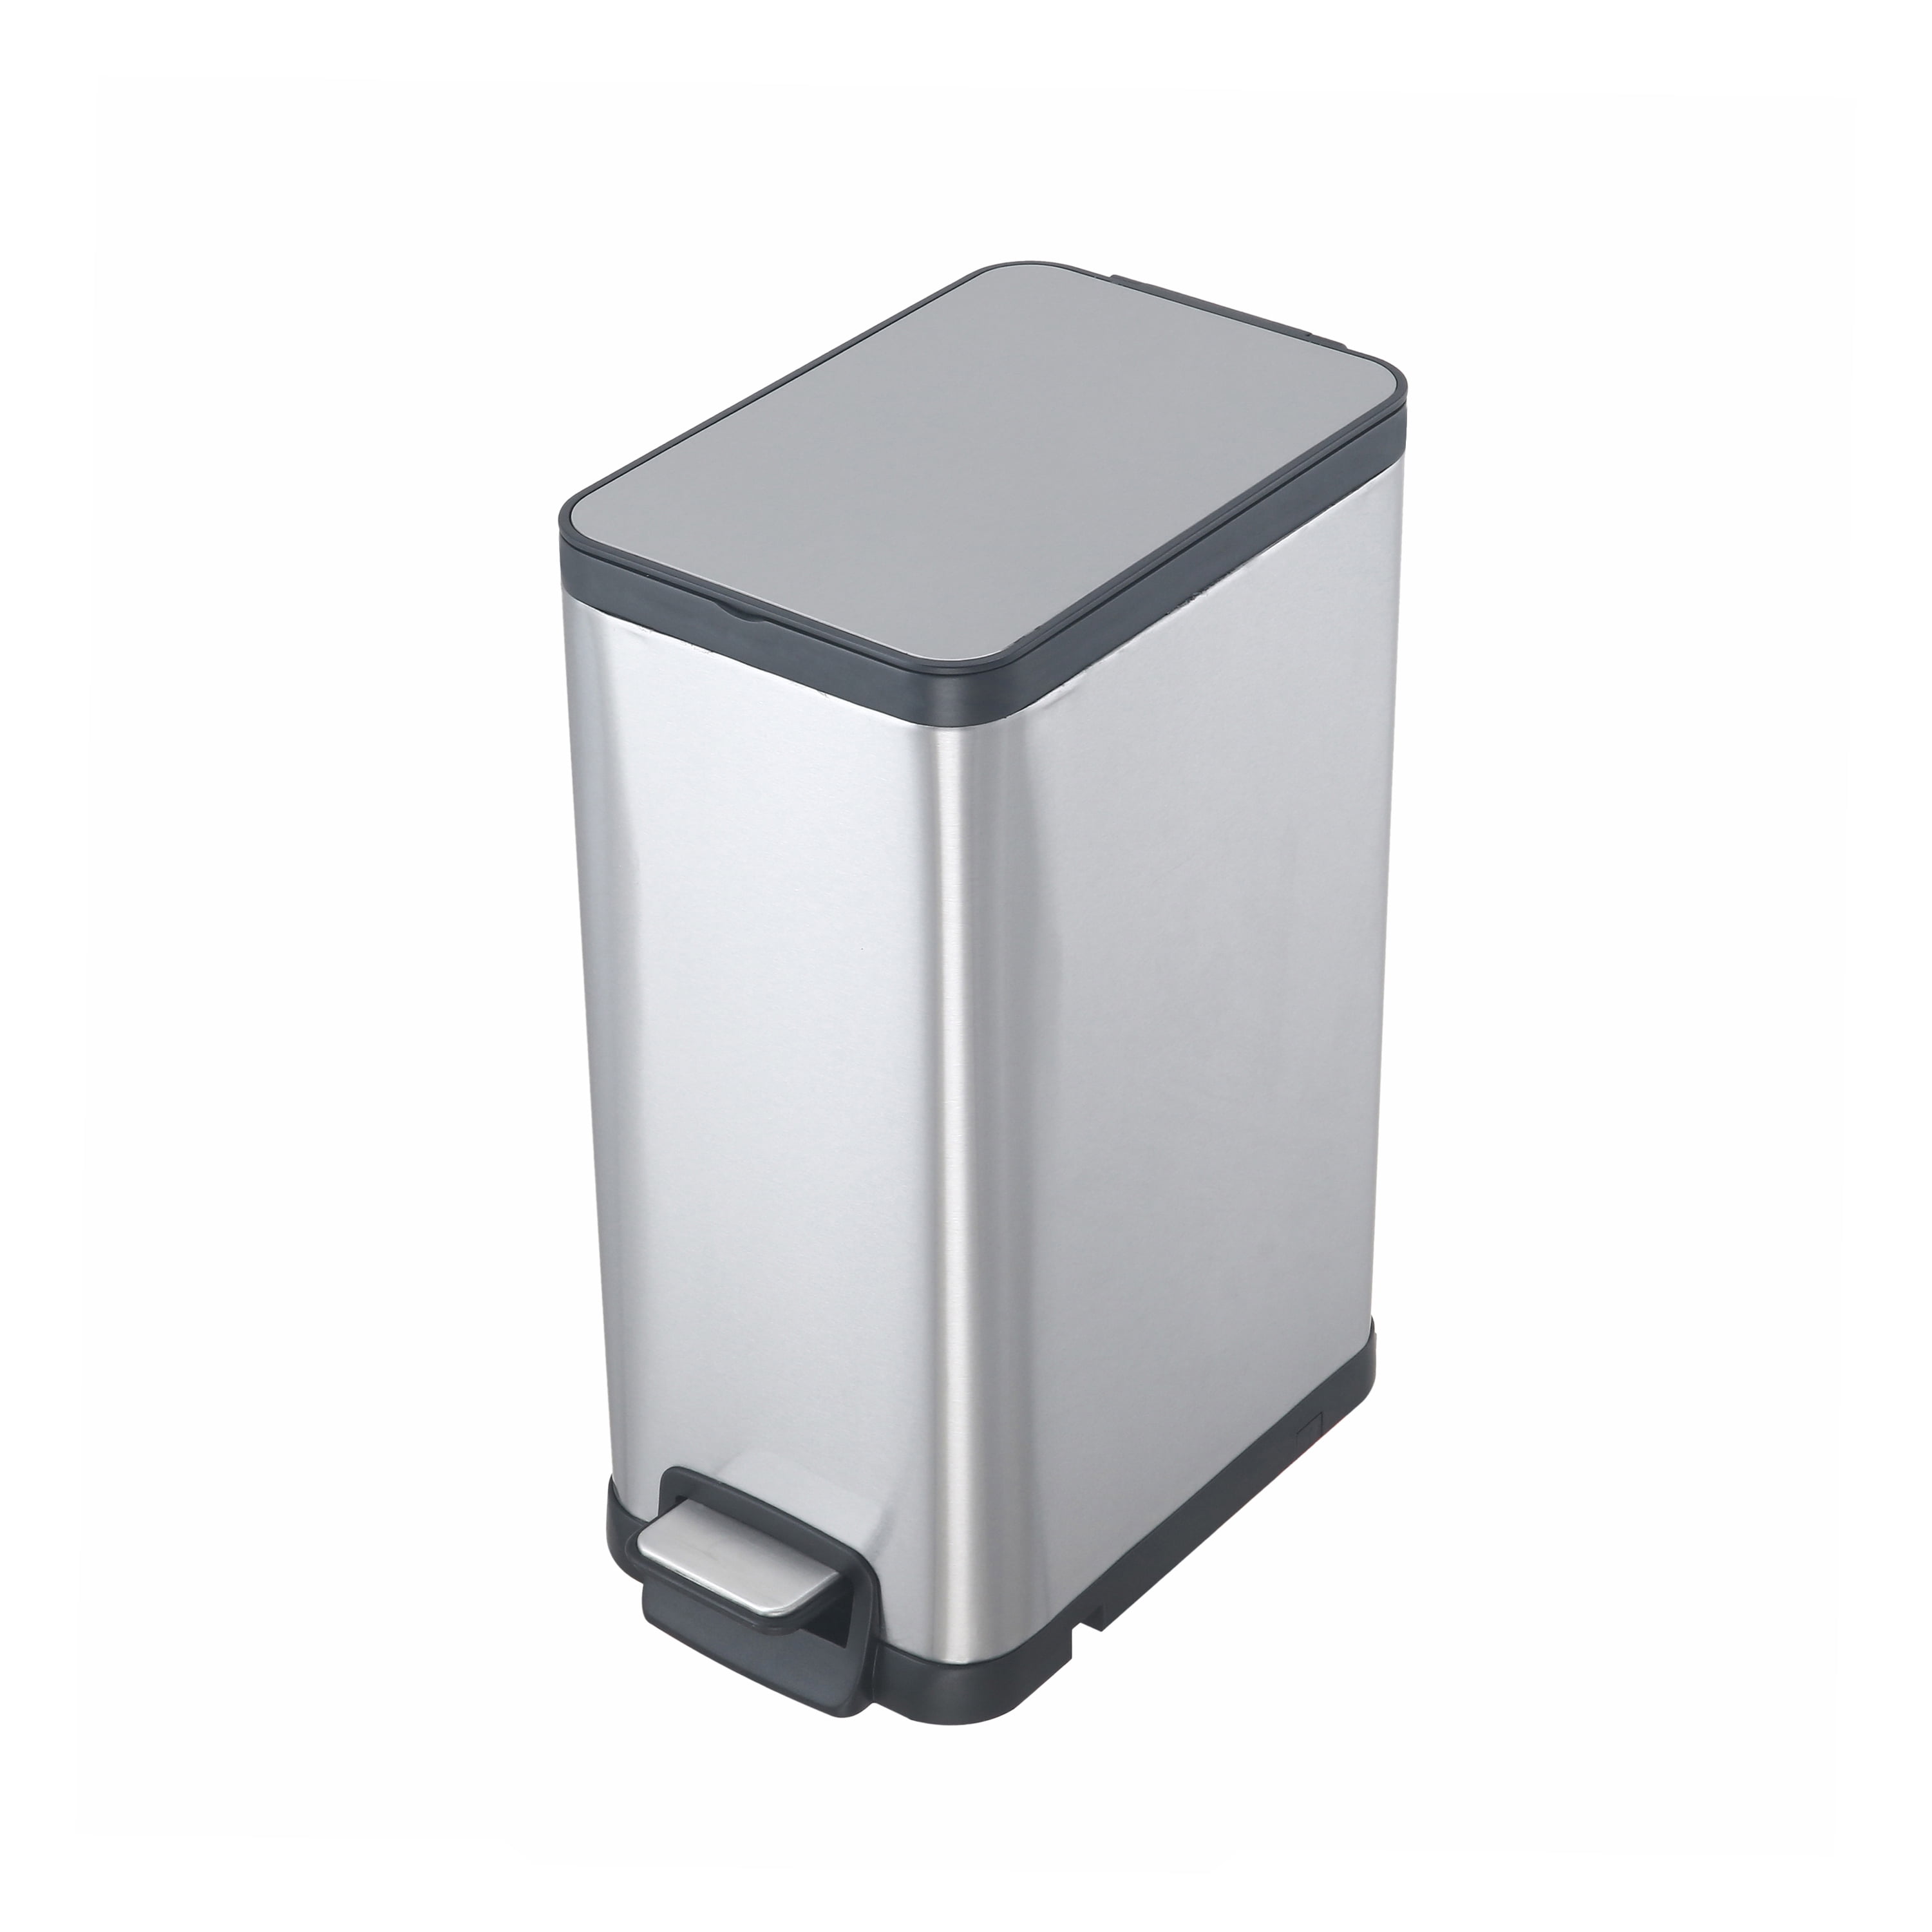 Details about   Trash Can Stainless Steel Motion Sensor Hand Free 13 & 2 Gal Set Kitchen Garbage 